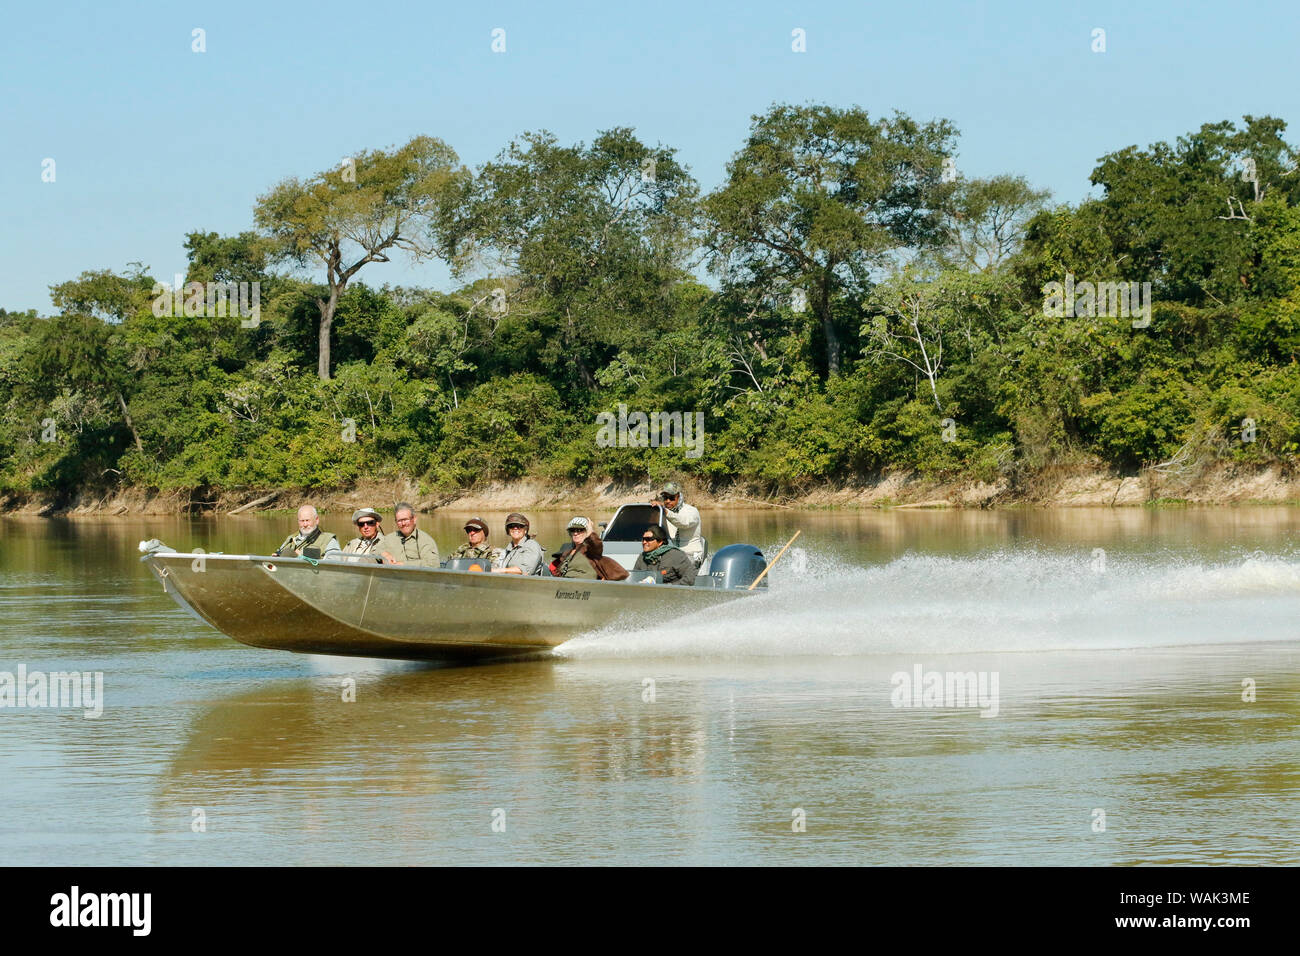 Pantanal, Mato Grosso, Brazil. Boat full of tourists racing off to a new report of a jaguar, on the Cuiaba river. (Editorial Use Only) Stock Photo